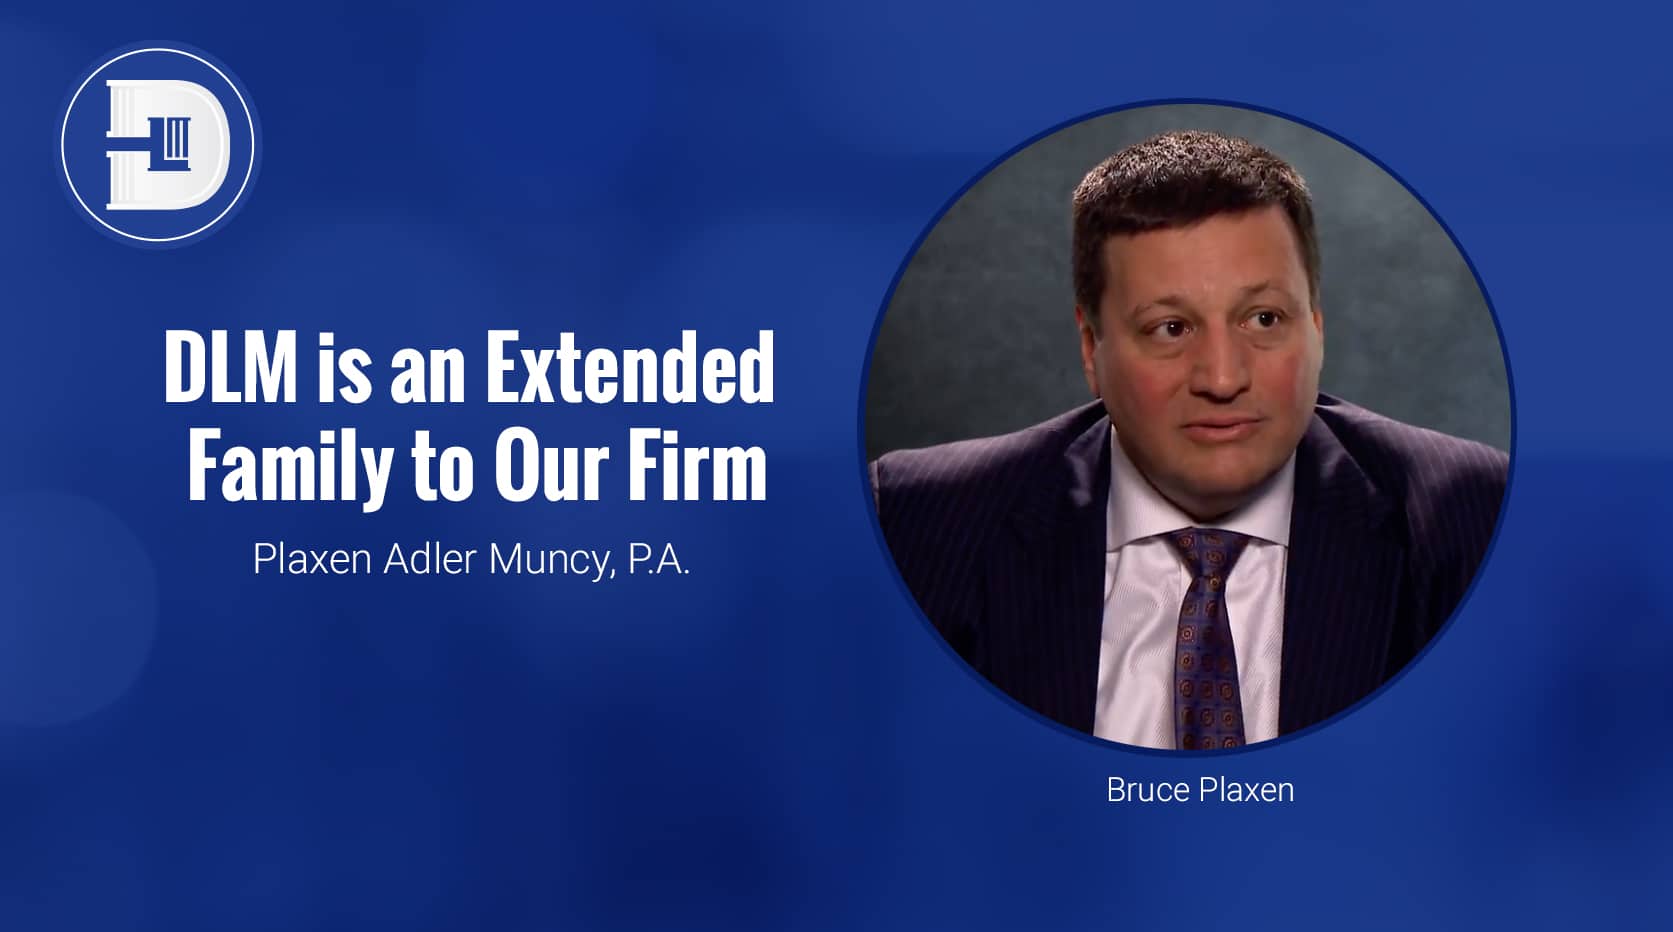 DLM is an Extended Family to Our Firm - Bruce Plaxen